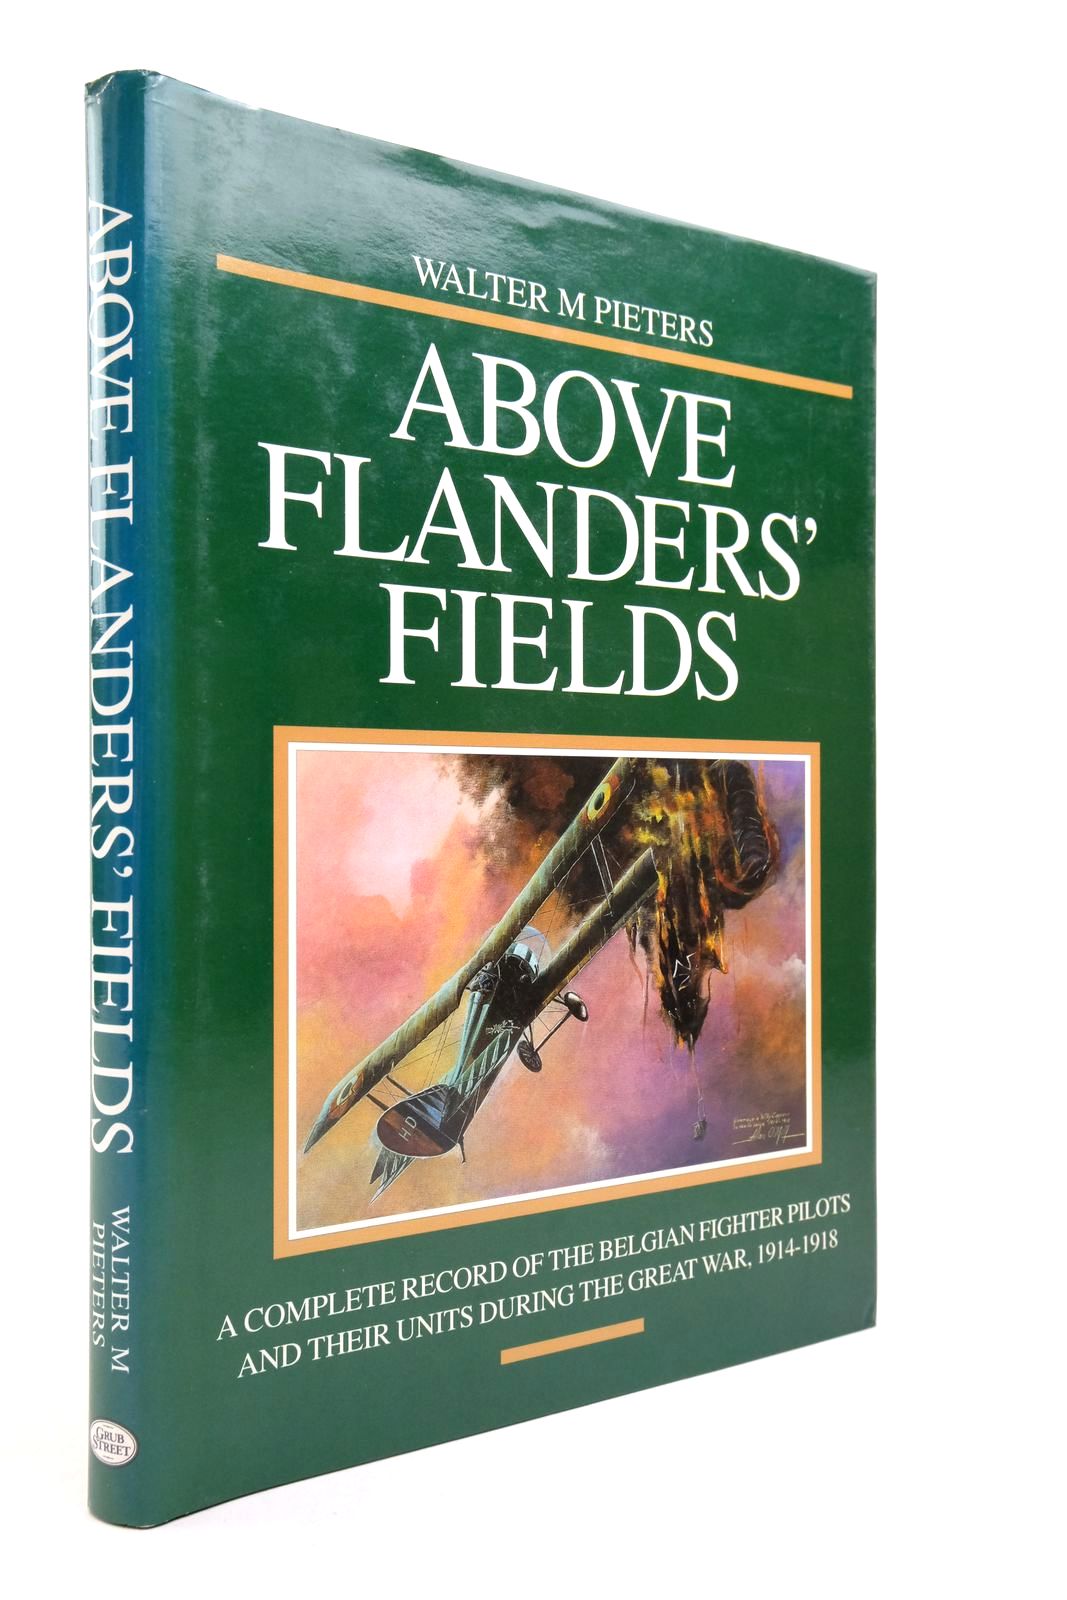 Photo of ABOVE FLANDERS' FIELDS written by Pieters, Walter M. published by Grub Street (STOCK CODE: 2139803)  for sale by Stella & Rose's Books